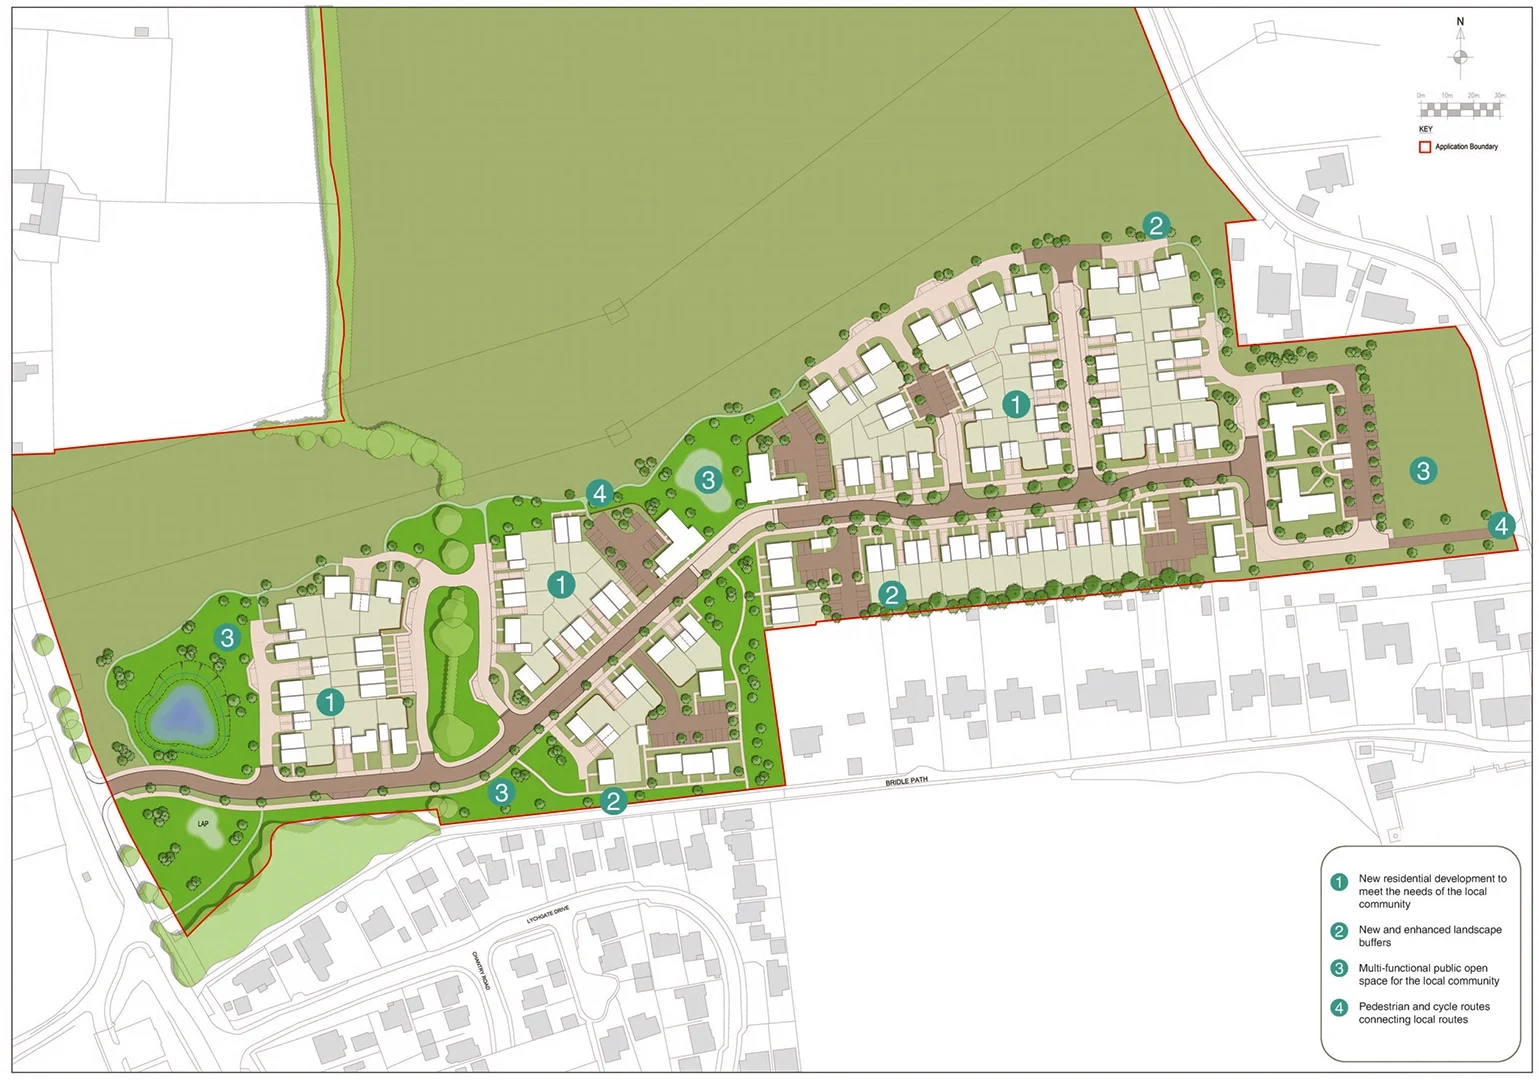 Site Masterplan for Land South of Five Heads Road, Horndean. Planning Application